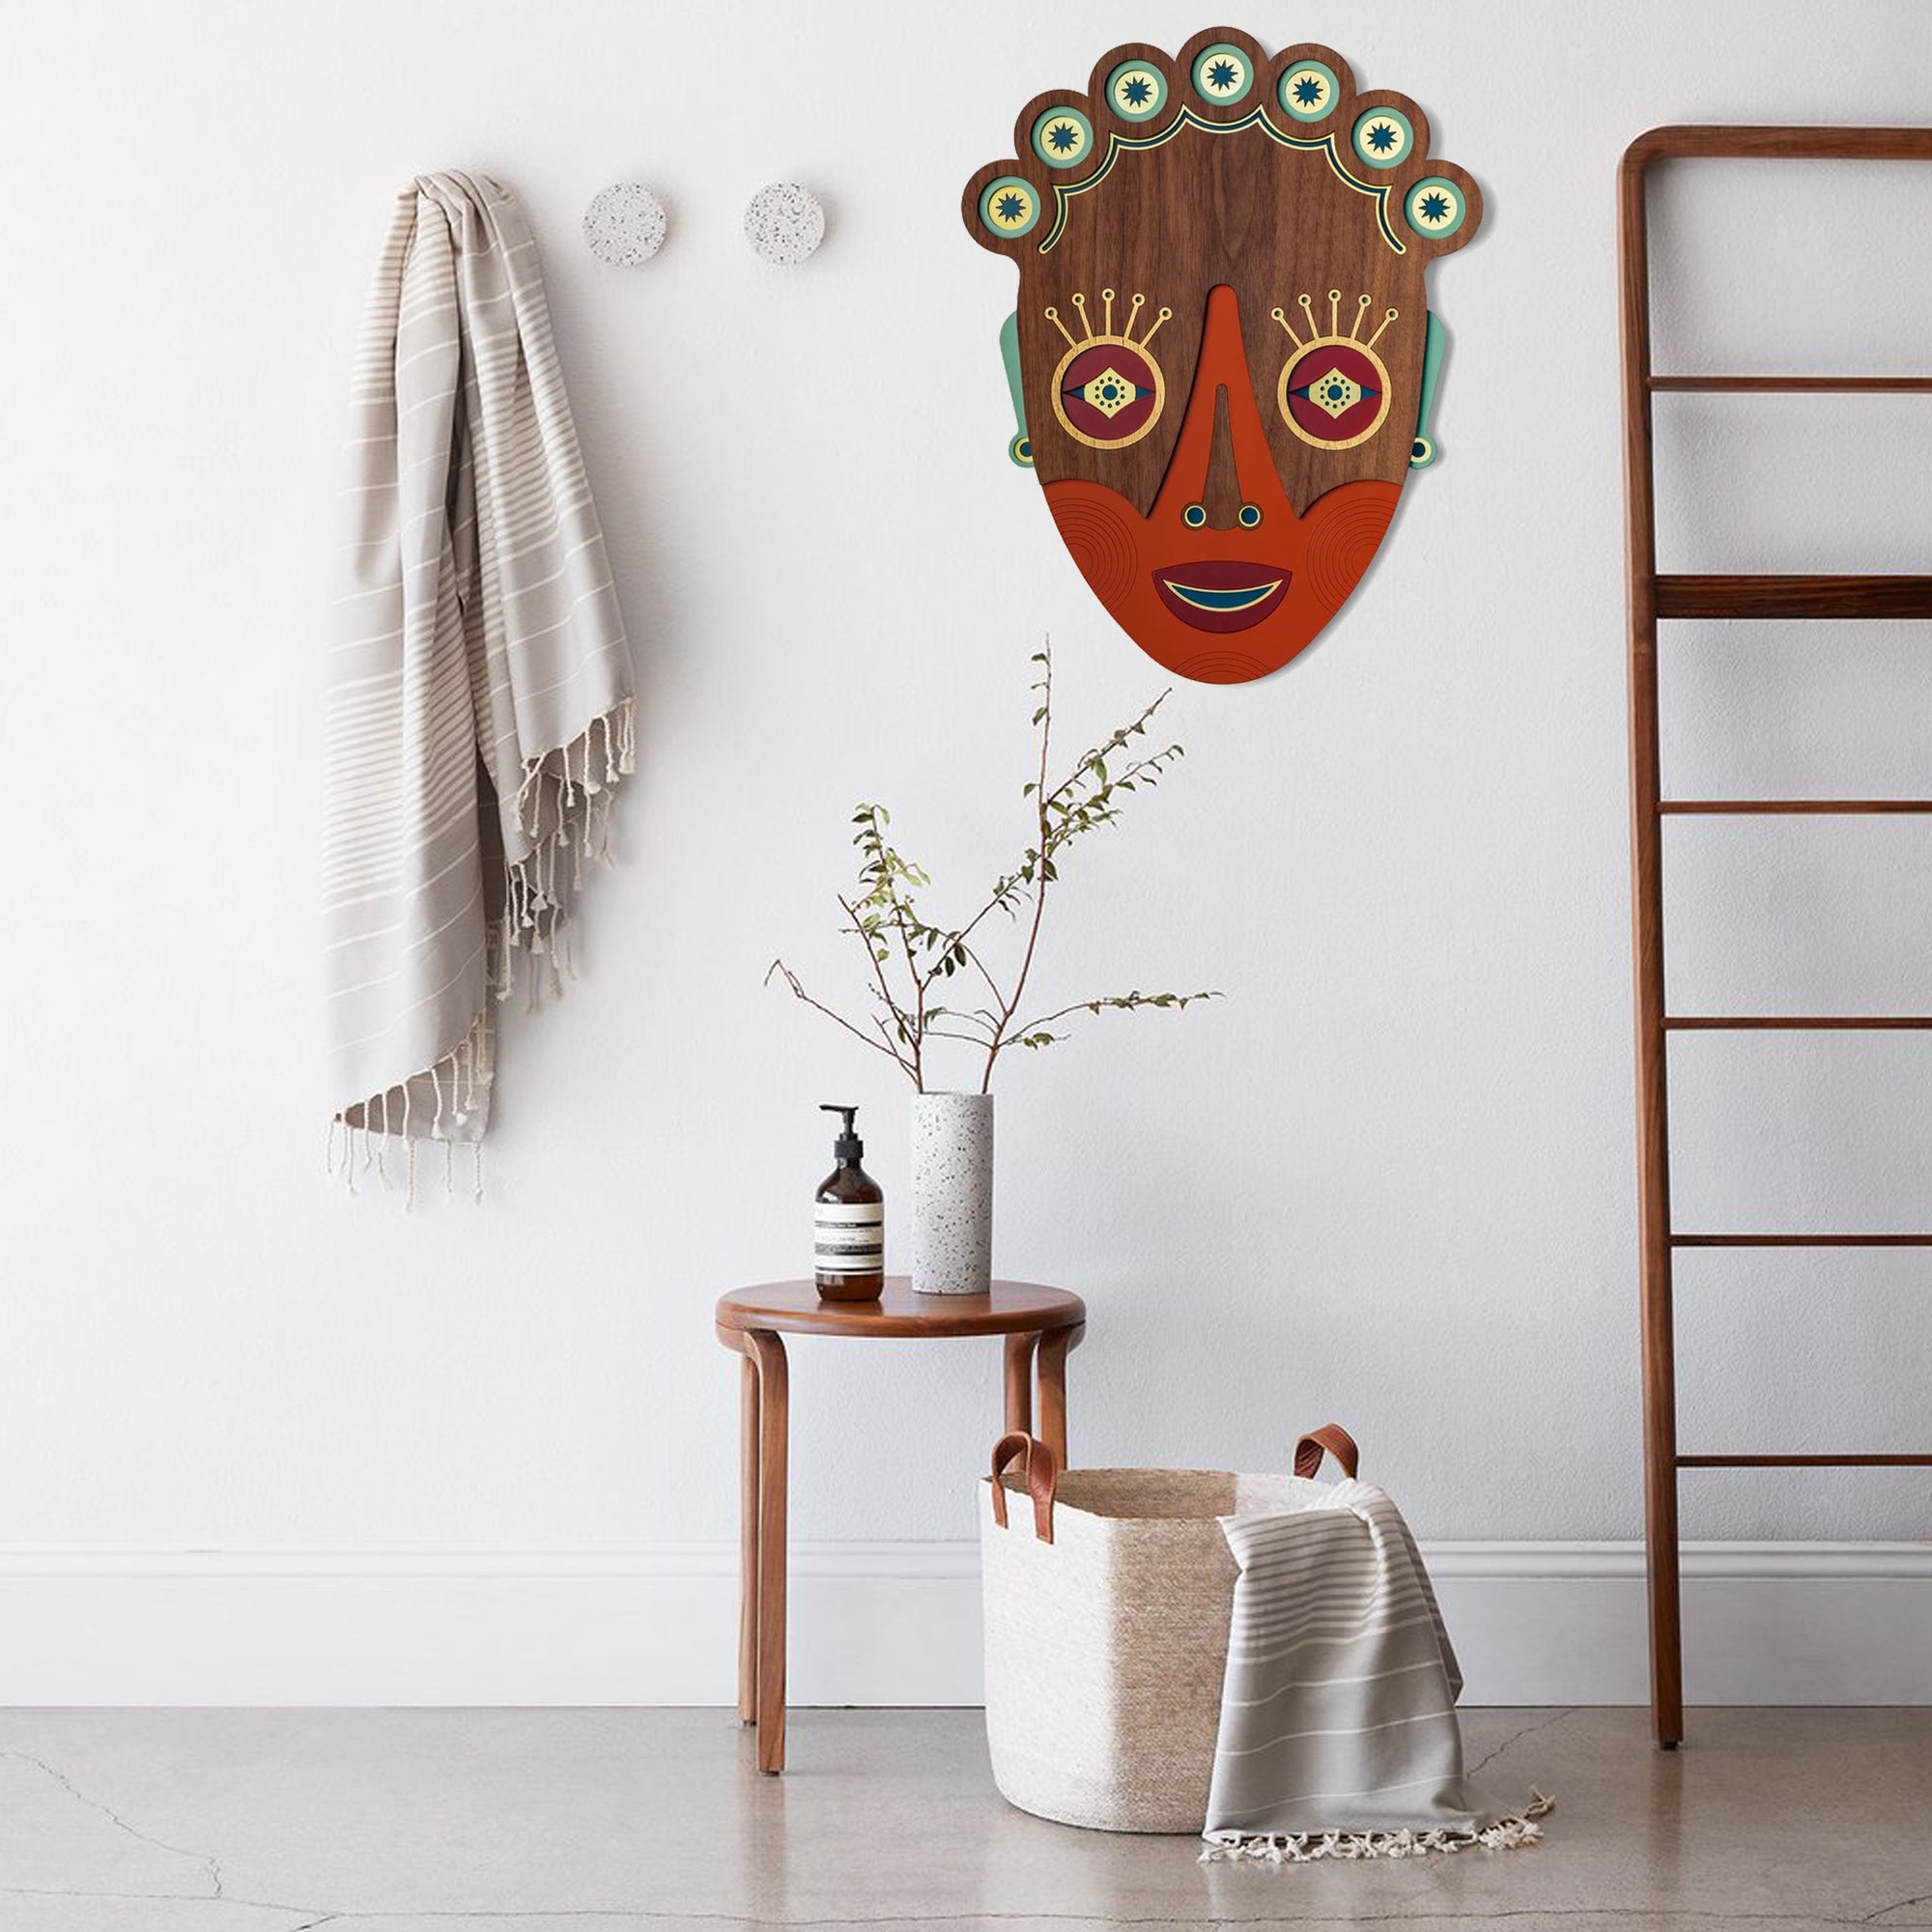 Abstract Cultural Wood Wall Art with Boho Chic & African Decor Patterns